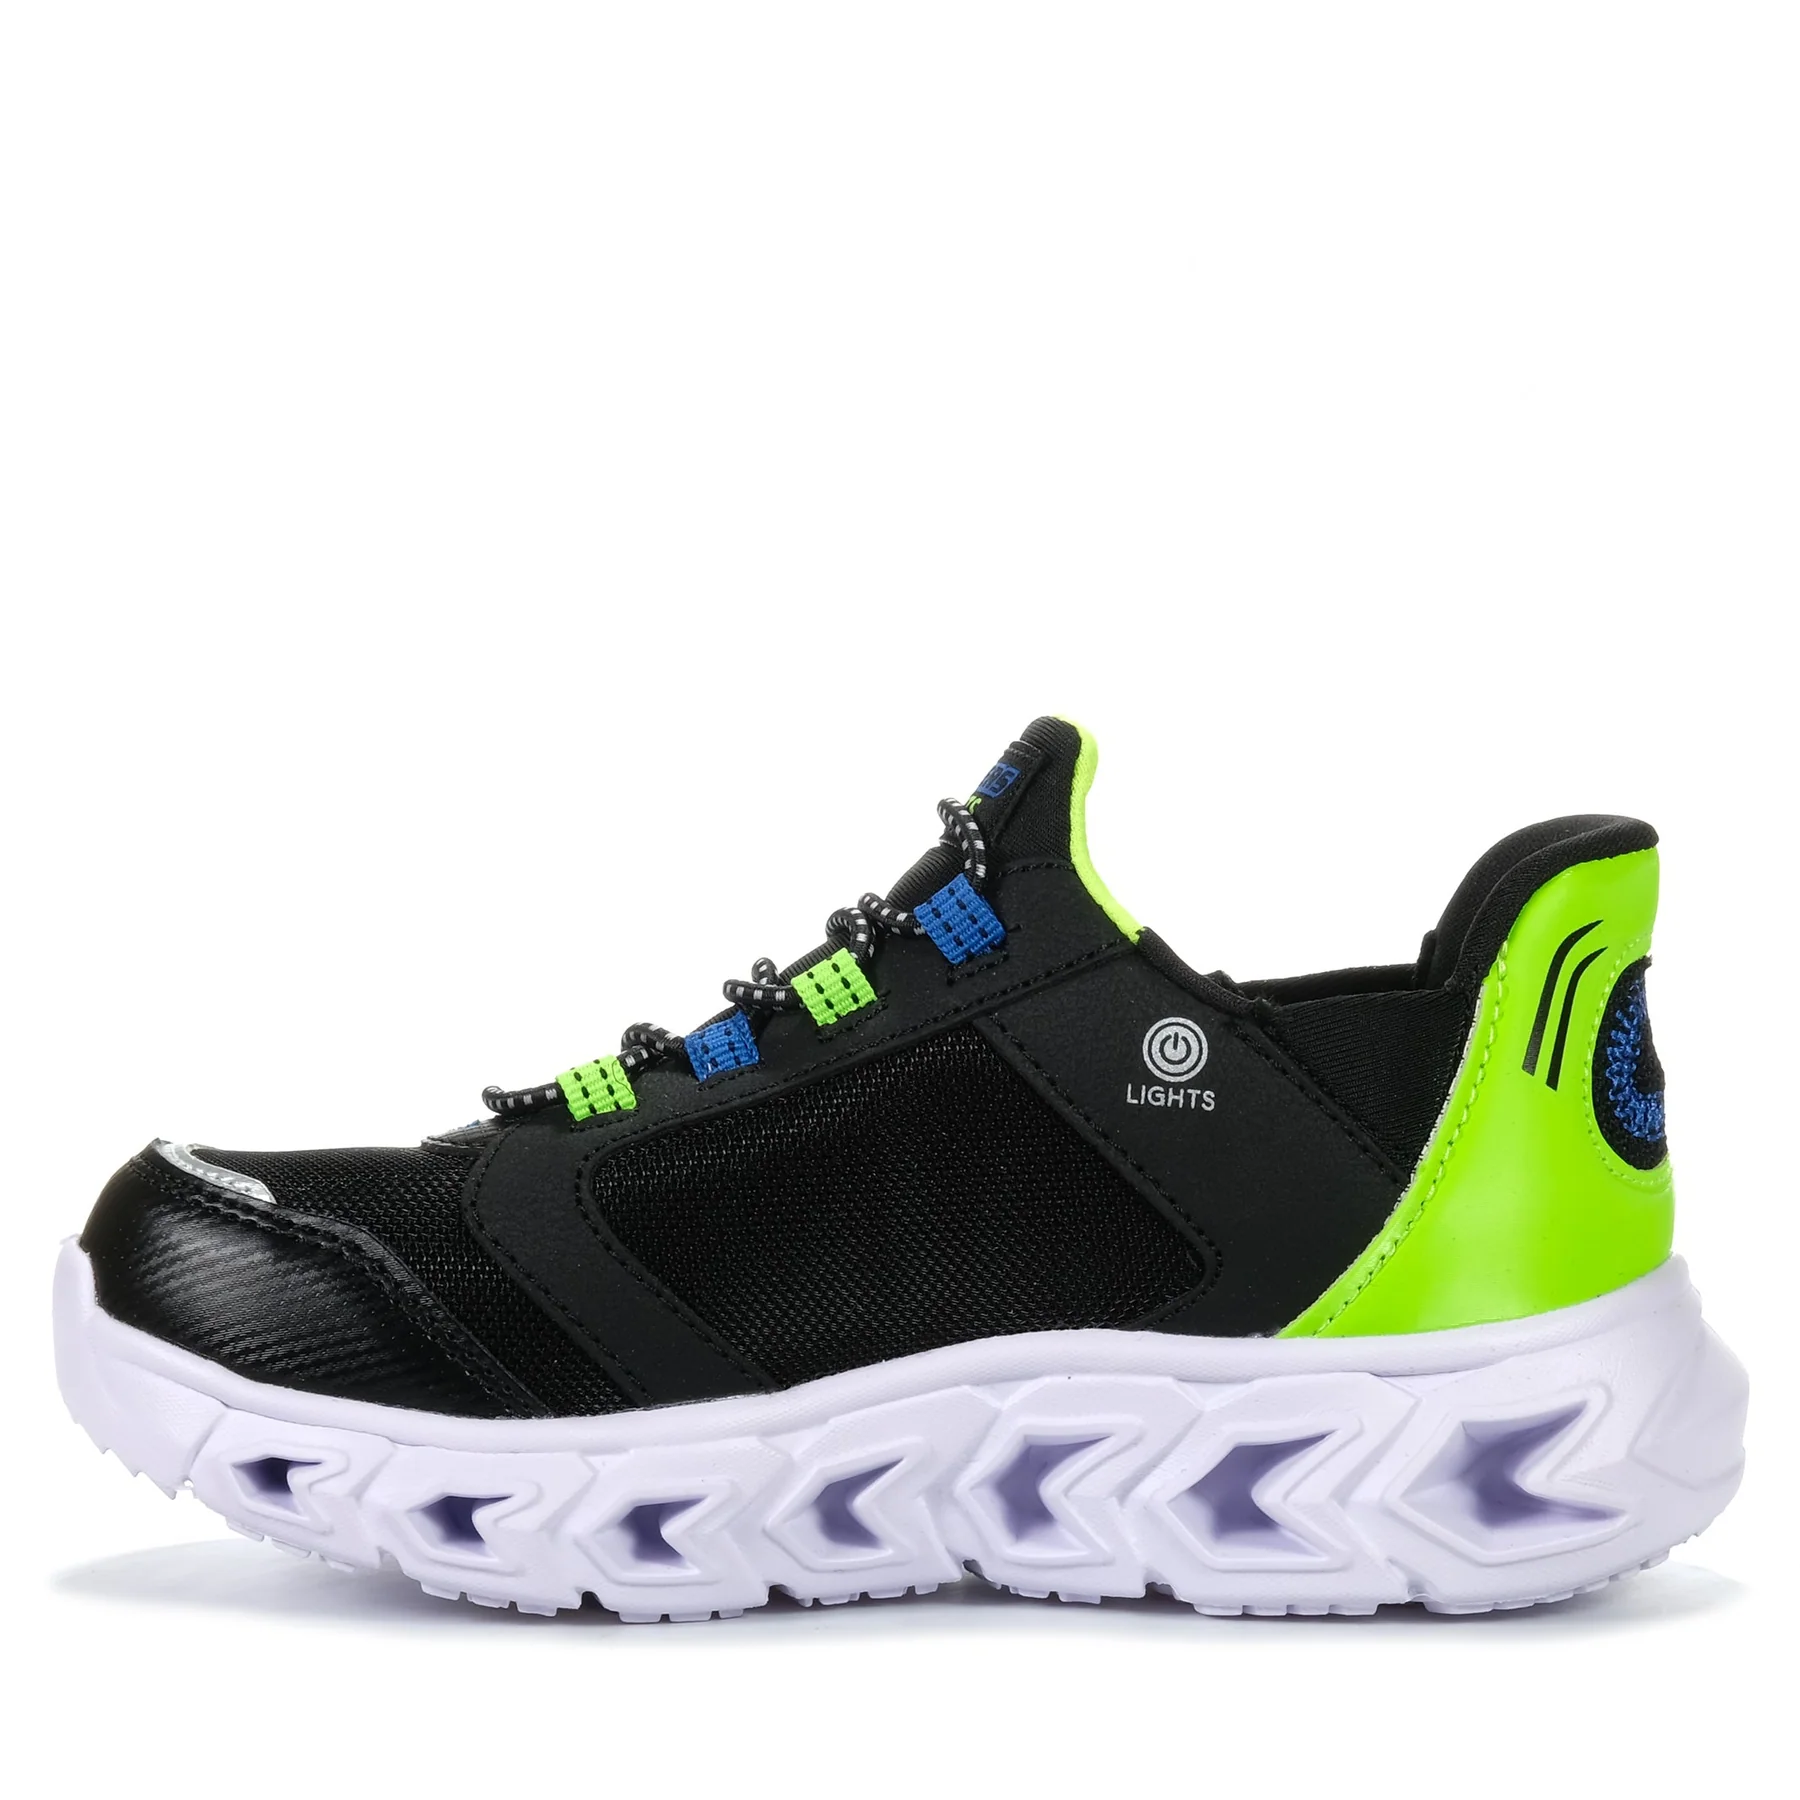 outside view of the Skechers Hypno-Flash 2.0 - Odelux shoe